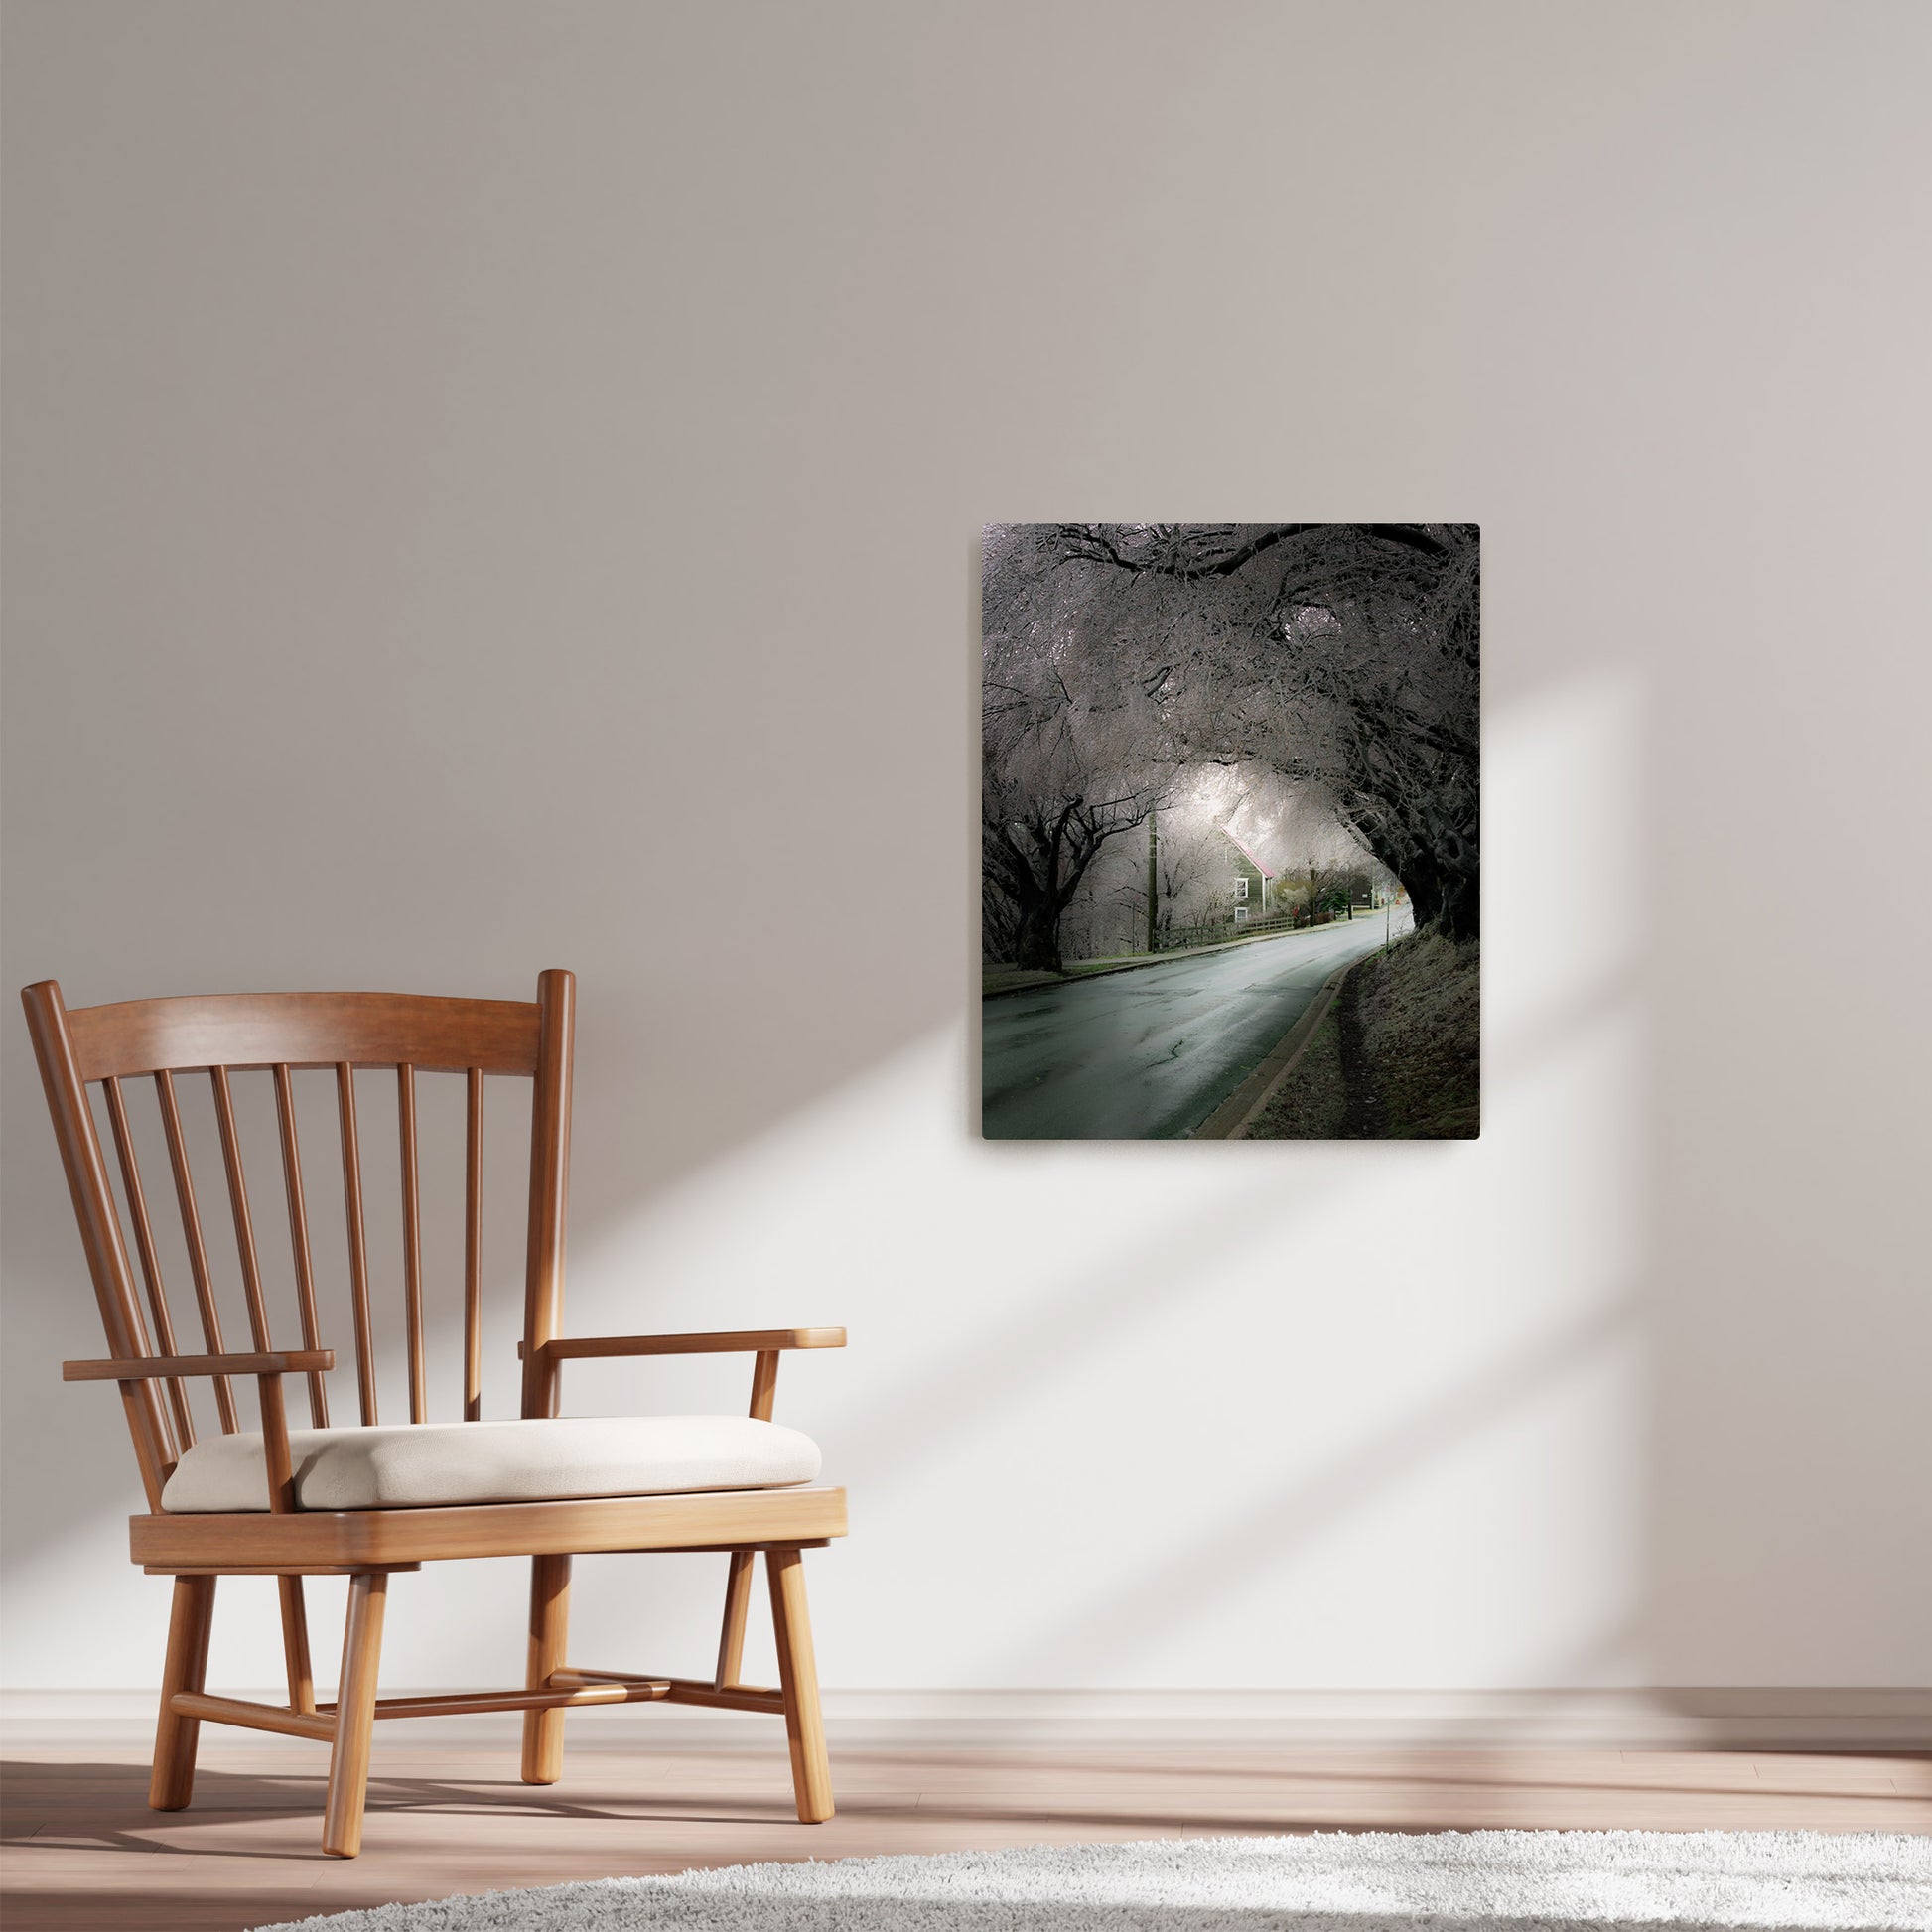 Ray Mackey's Ice Storm Drama photography reproduced on HD metal print and displayed on wall